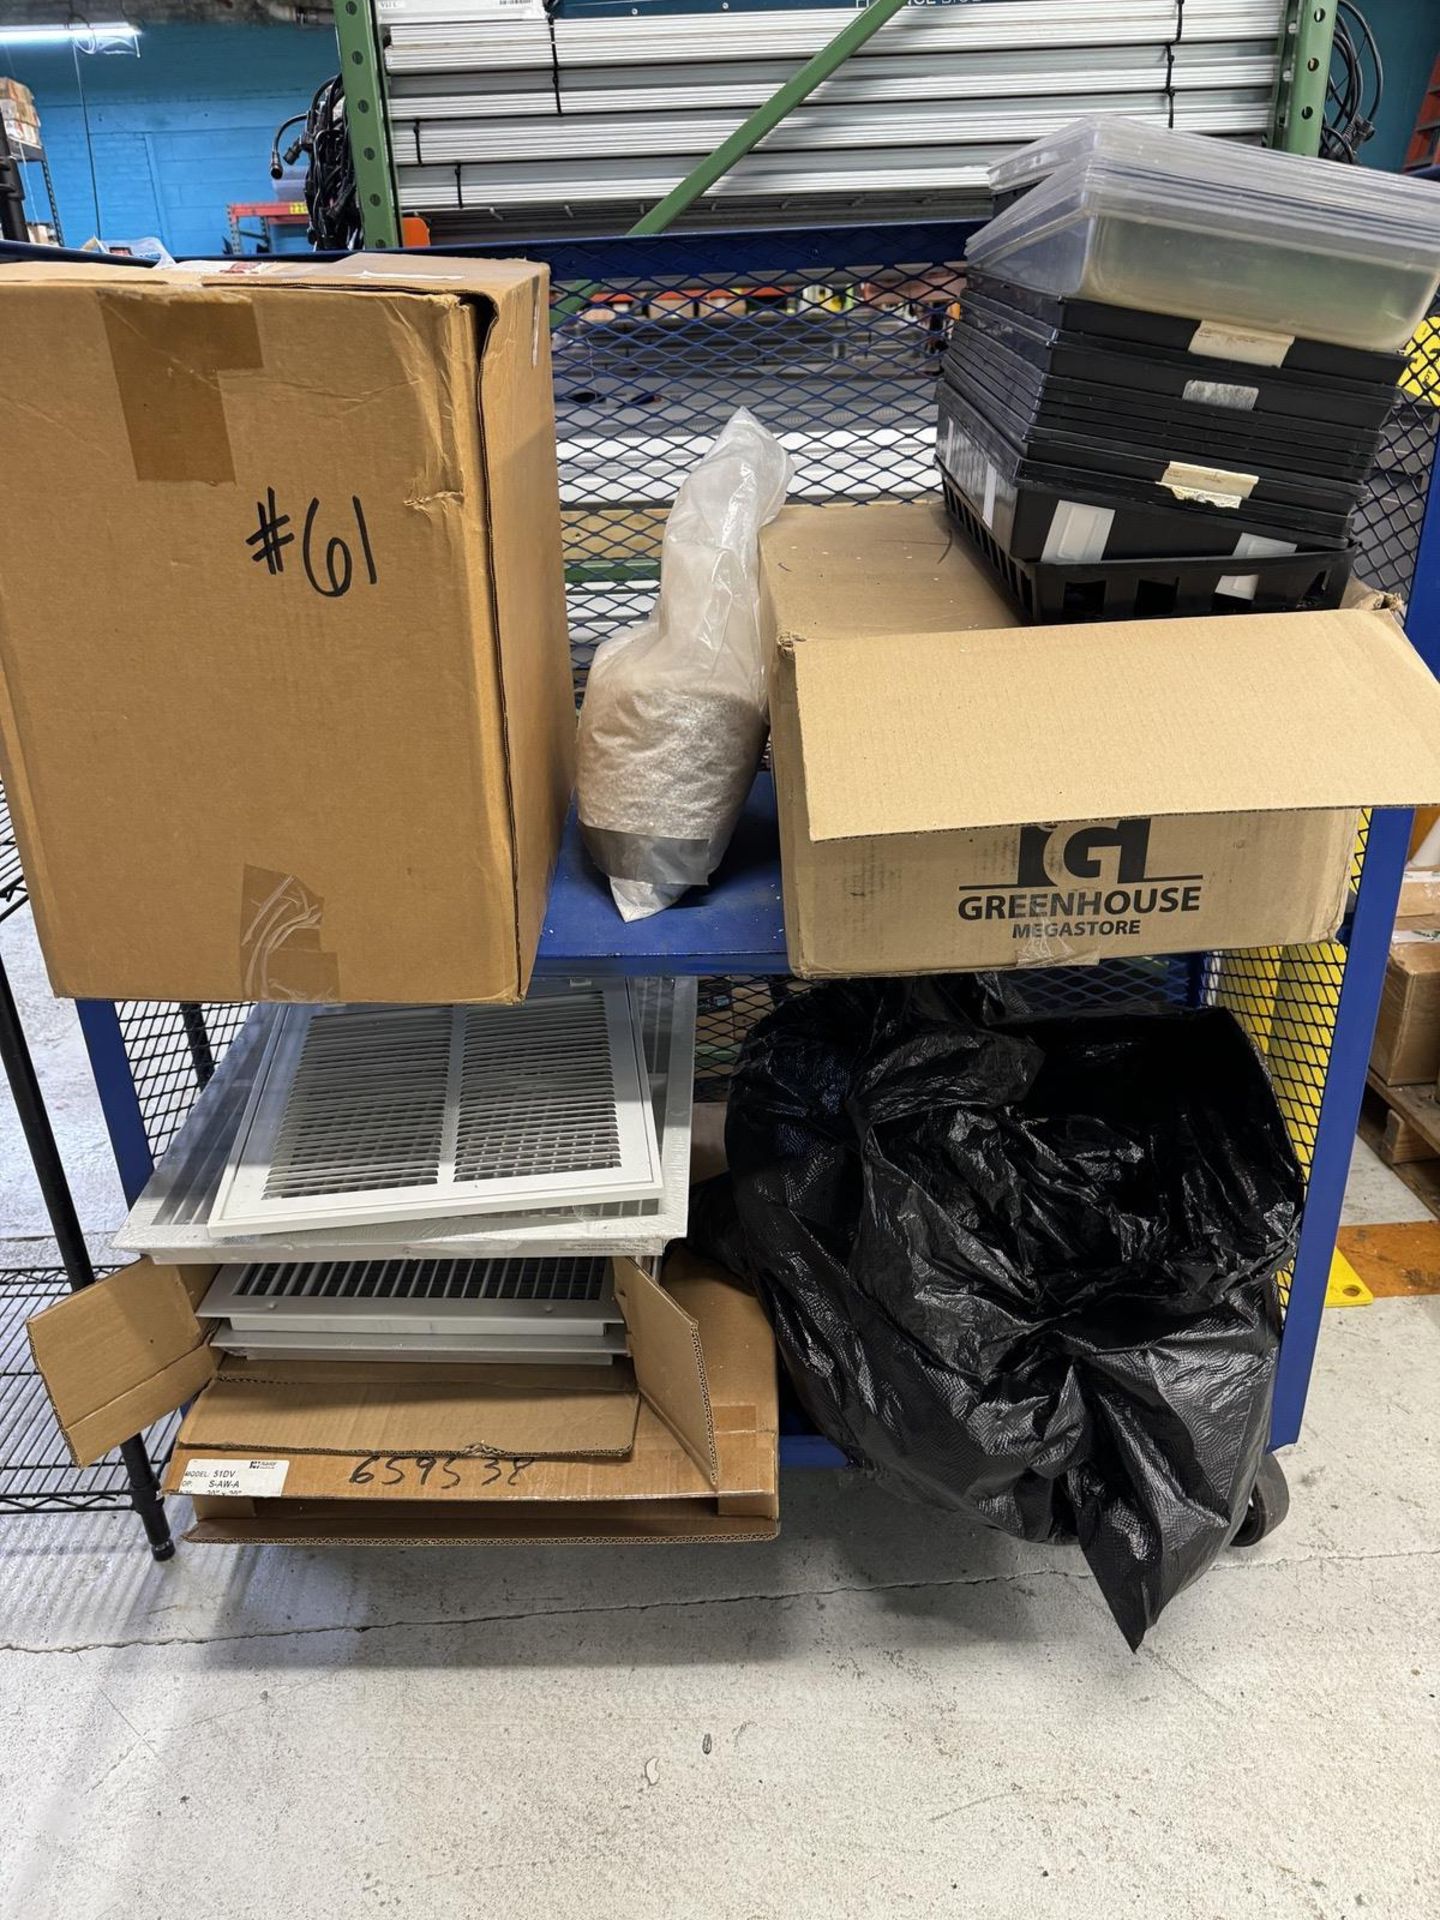 Lot Blue Port. 2 Shelf Cart with Vent Covers, Plastic Trays, Filters, Etc. - Image 2 of 4